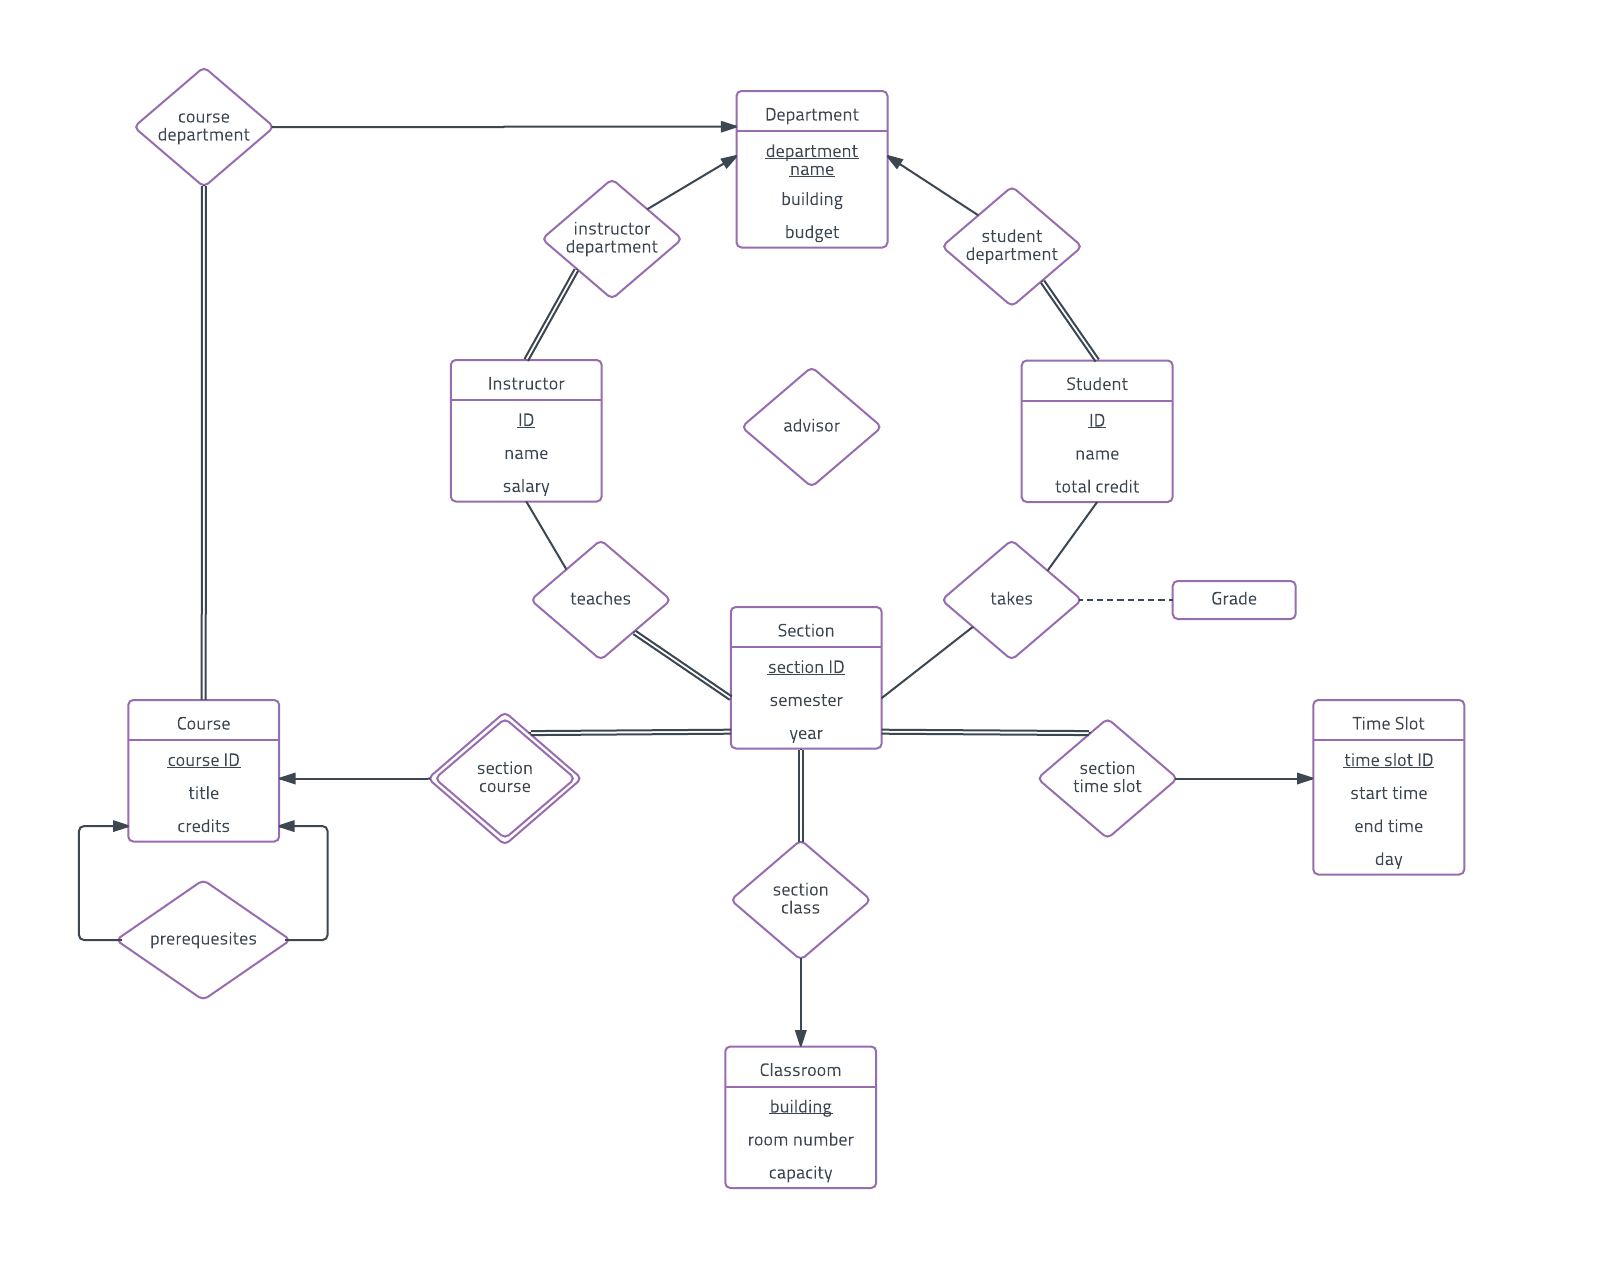 Er Diagram Examples And Templates | Lucidchart with regard to Er Diagram Hotel Management